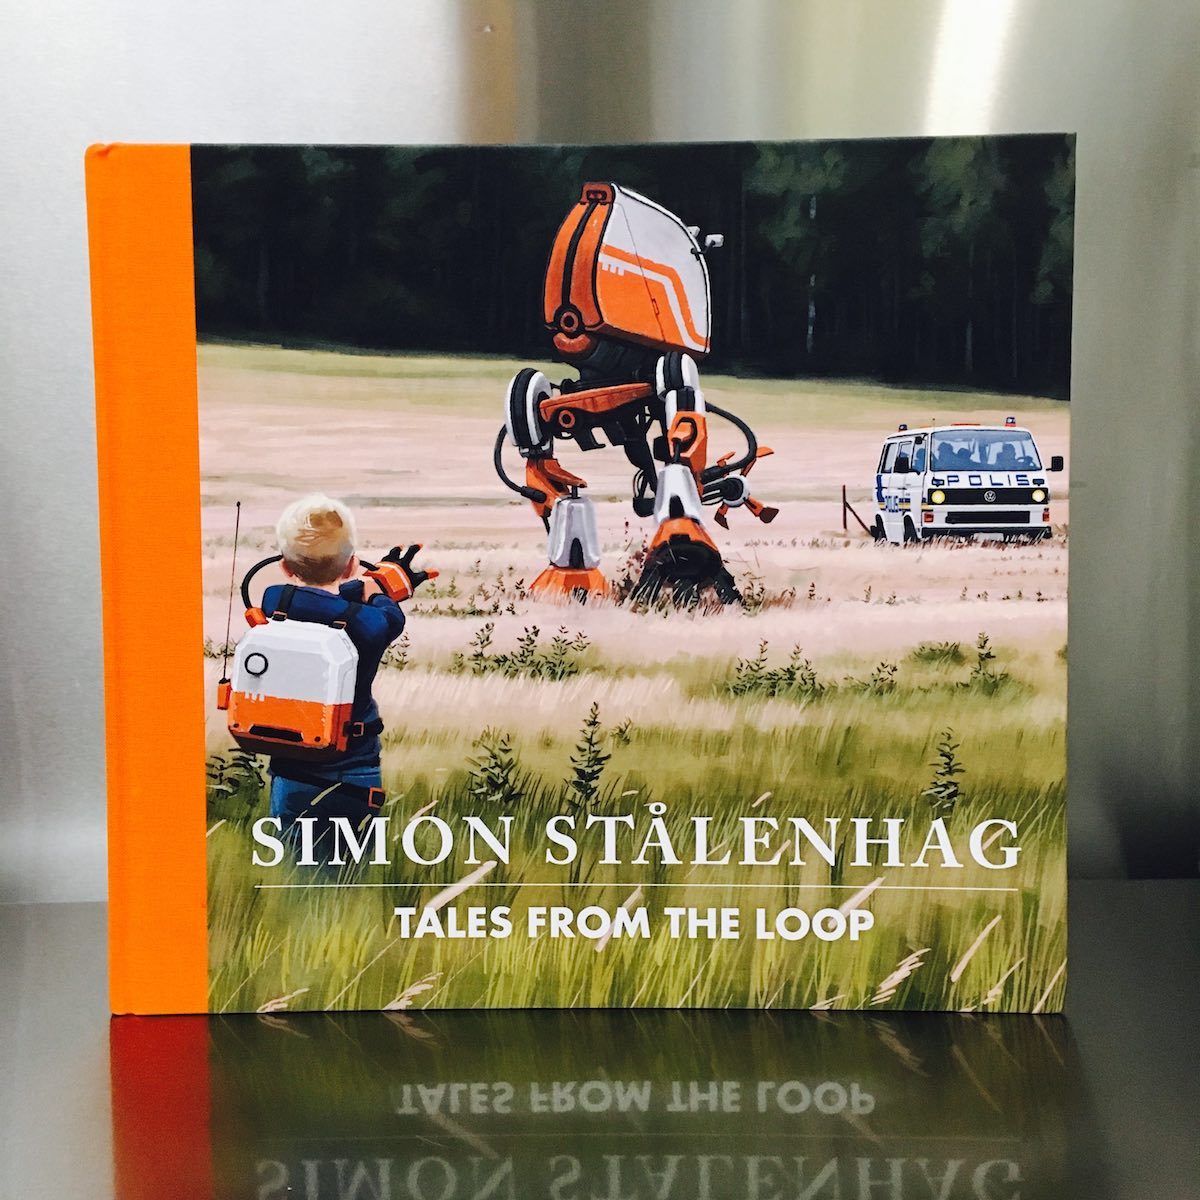 Tales from the Loop – An eerie account of a physics research facility gone awry

Tales from the Loop

by Simon Stålenhag

Design Studio Press

2015, 128 pages, 10.1 x 11.2 x 0.7 inches

$33 
Buy a copy on Amazon

Unfamiliar with sci-fi artist Simon Stålenhag, I was sucked into his eerie dystopian history the instant I cracked open Tales from the Loop. His hyper-real digital paintings depict beautiful Swedish country towns where snow falls in the winter and children play in nature. But each of these pastoral scenes are jarring, with intrusive machines, robots, discarded equipment, and power lines upstaging the otherwise serene landscape.

The book explains that these paintings were inspired by childhood memories of the author, who grew up in a large area of Sweden that housed an underground experimental physics research facility known as The Loop. Alongside each painting is a short essay from the author’s memory. For instance, the three cooling towers in the photo above were built to release heat from the core of the Loop. The towers, which “started like a deep vibration in the ground that slowly rose to three horn-like blasts,” remind Stålenhag of a miserable day he had with a boy named Ossian, who had lured him to his house to play Crash Test Dummies, but ended up bullying him with the help of his brother until Stålenhag went home in tears.

Each painting is accompanied by one of these short yet captivating stories, and their detailed, relatable quality had me going. As I read about Stålenhag and his best friend Olof sneaking off with a boat on a nice summer day to a disturbing machine-littered swimming pond, I kept thinking, “I must go online and research the Loop! How could I have never heard about this creepy place?” Then I quickly got to the robots. Huge dinosaur and prehistoric animal robots. And towering two and four-legged machine robots, crushing everything in their paths. Suddenly, with a “Wait a minute!” moment, I knew I’d been had. The same way I was duped when I saw The Blair Witch Project and thought, at first, that it was a real documentary. But my gullibility doesn’t bother me – what a fun treat it is to be swept into a horrific alternative reality, only to find out it’s masterful fiction.  

Stalenhag’s Tales from the Loop is striking, creepy, and captivating. It’s both an intriguing coffee table book and an engaging novel of sorts. And for me, it was an exciting ride.

– Carla Sinclair

February 26, 2016